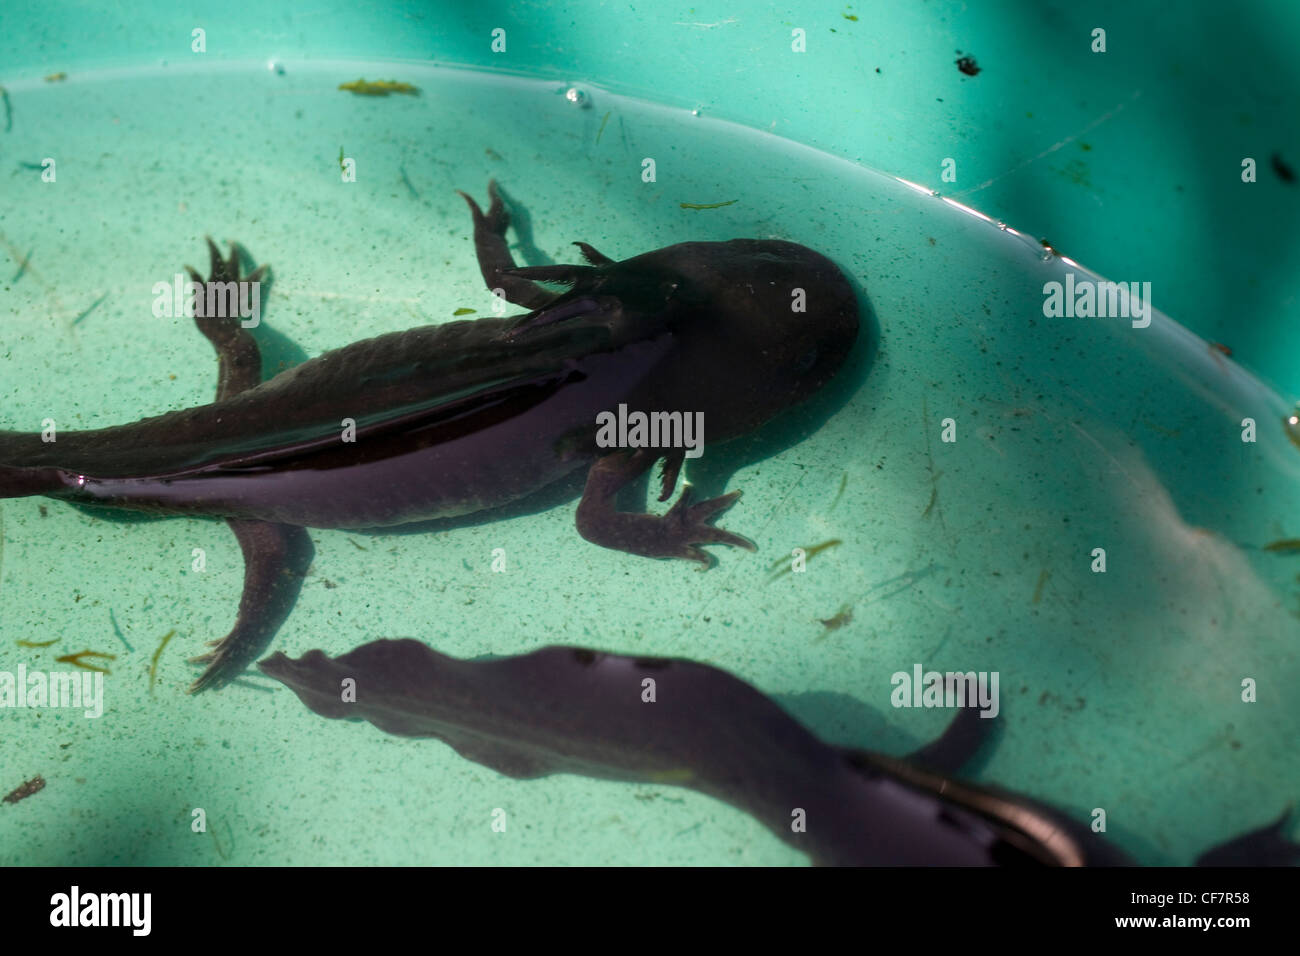 One axolotl or ajolote, ambystoma mexicanum, a type of salamander swims in a fish tank in Xochimilco, Mexico City. Stock Photo